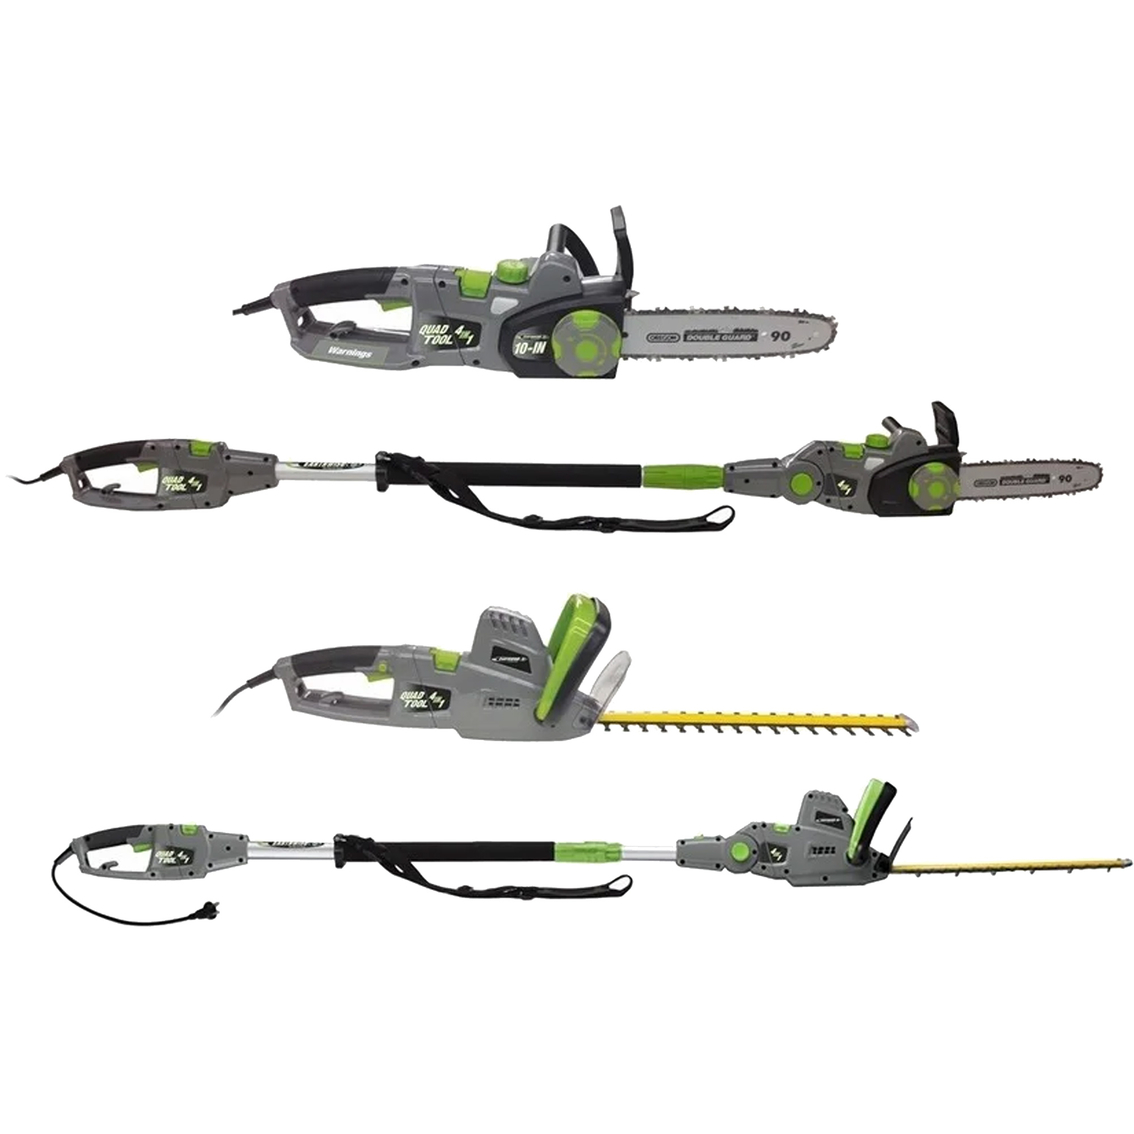 Earthwise 4 in 1 Convertible Pole/Hedge Chain Saw - Image 2 of 3